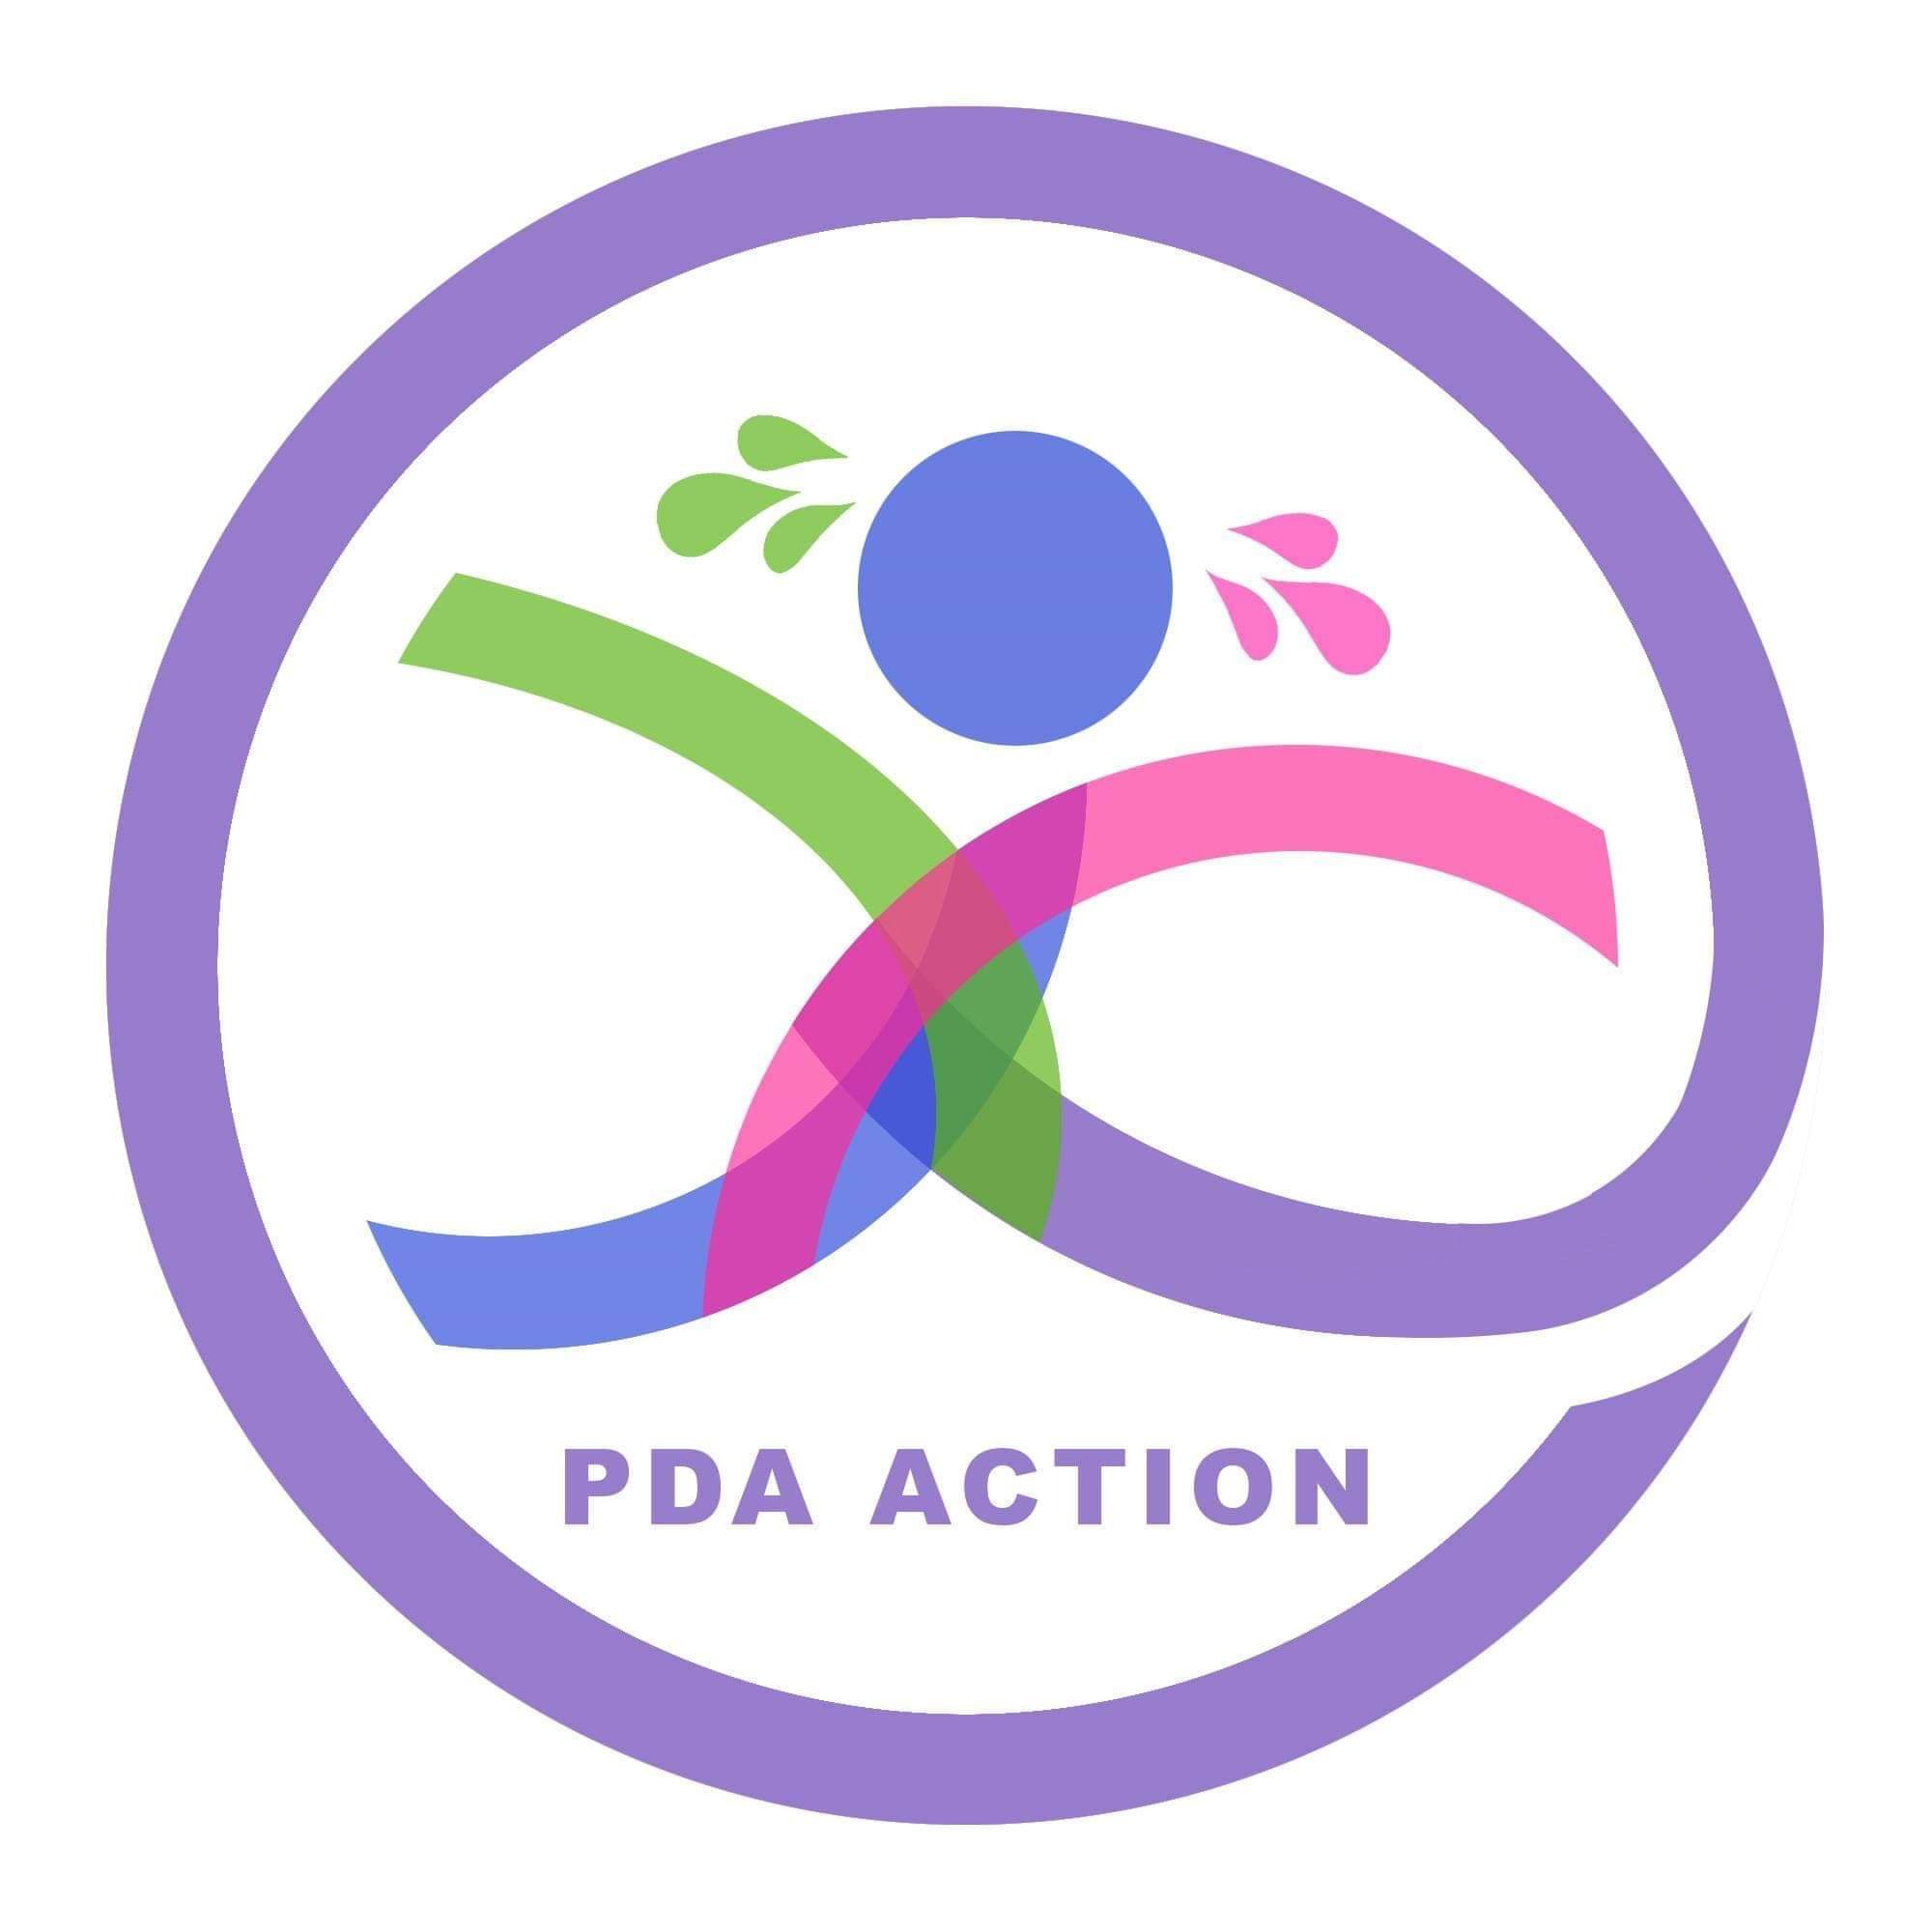 PDA Action is headed by four parents of children diagnosed with autism and who have a profile of Pathological Demand Avoidance.